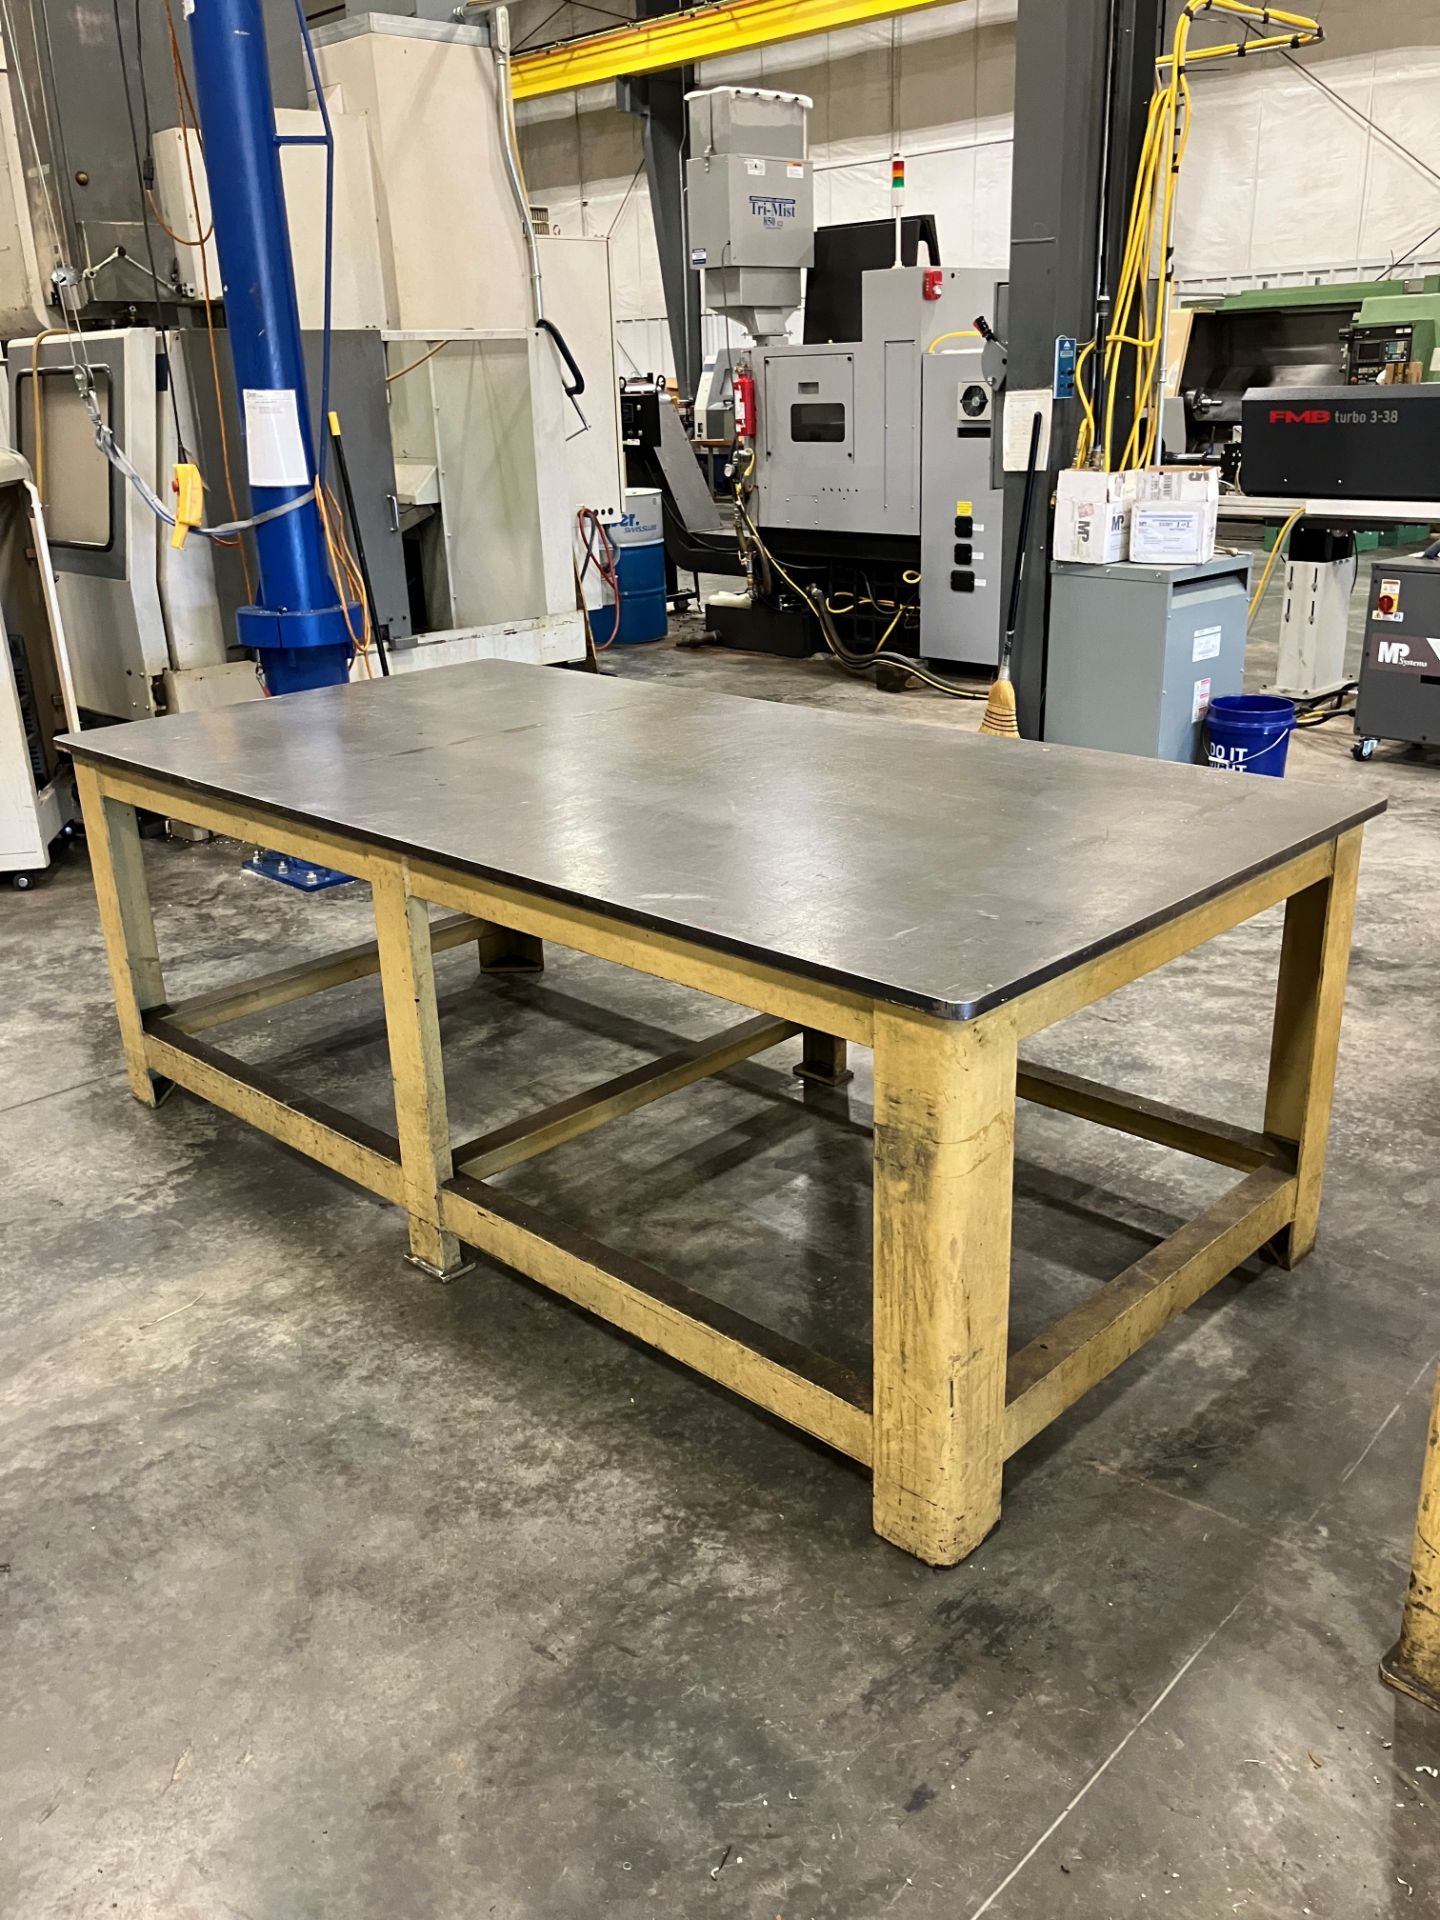 4' x 8' x 1'' Steel Table (1 Week Delayed Delivery)